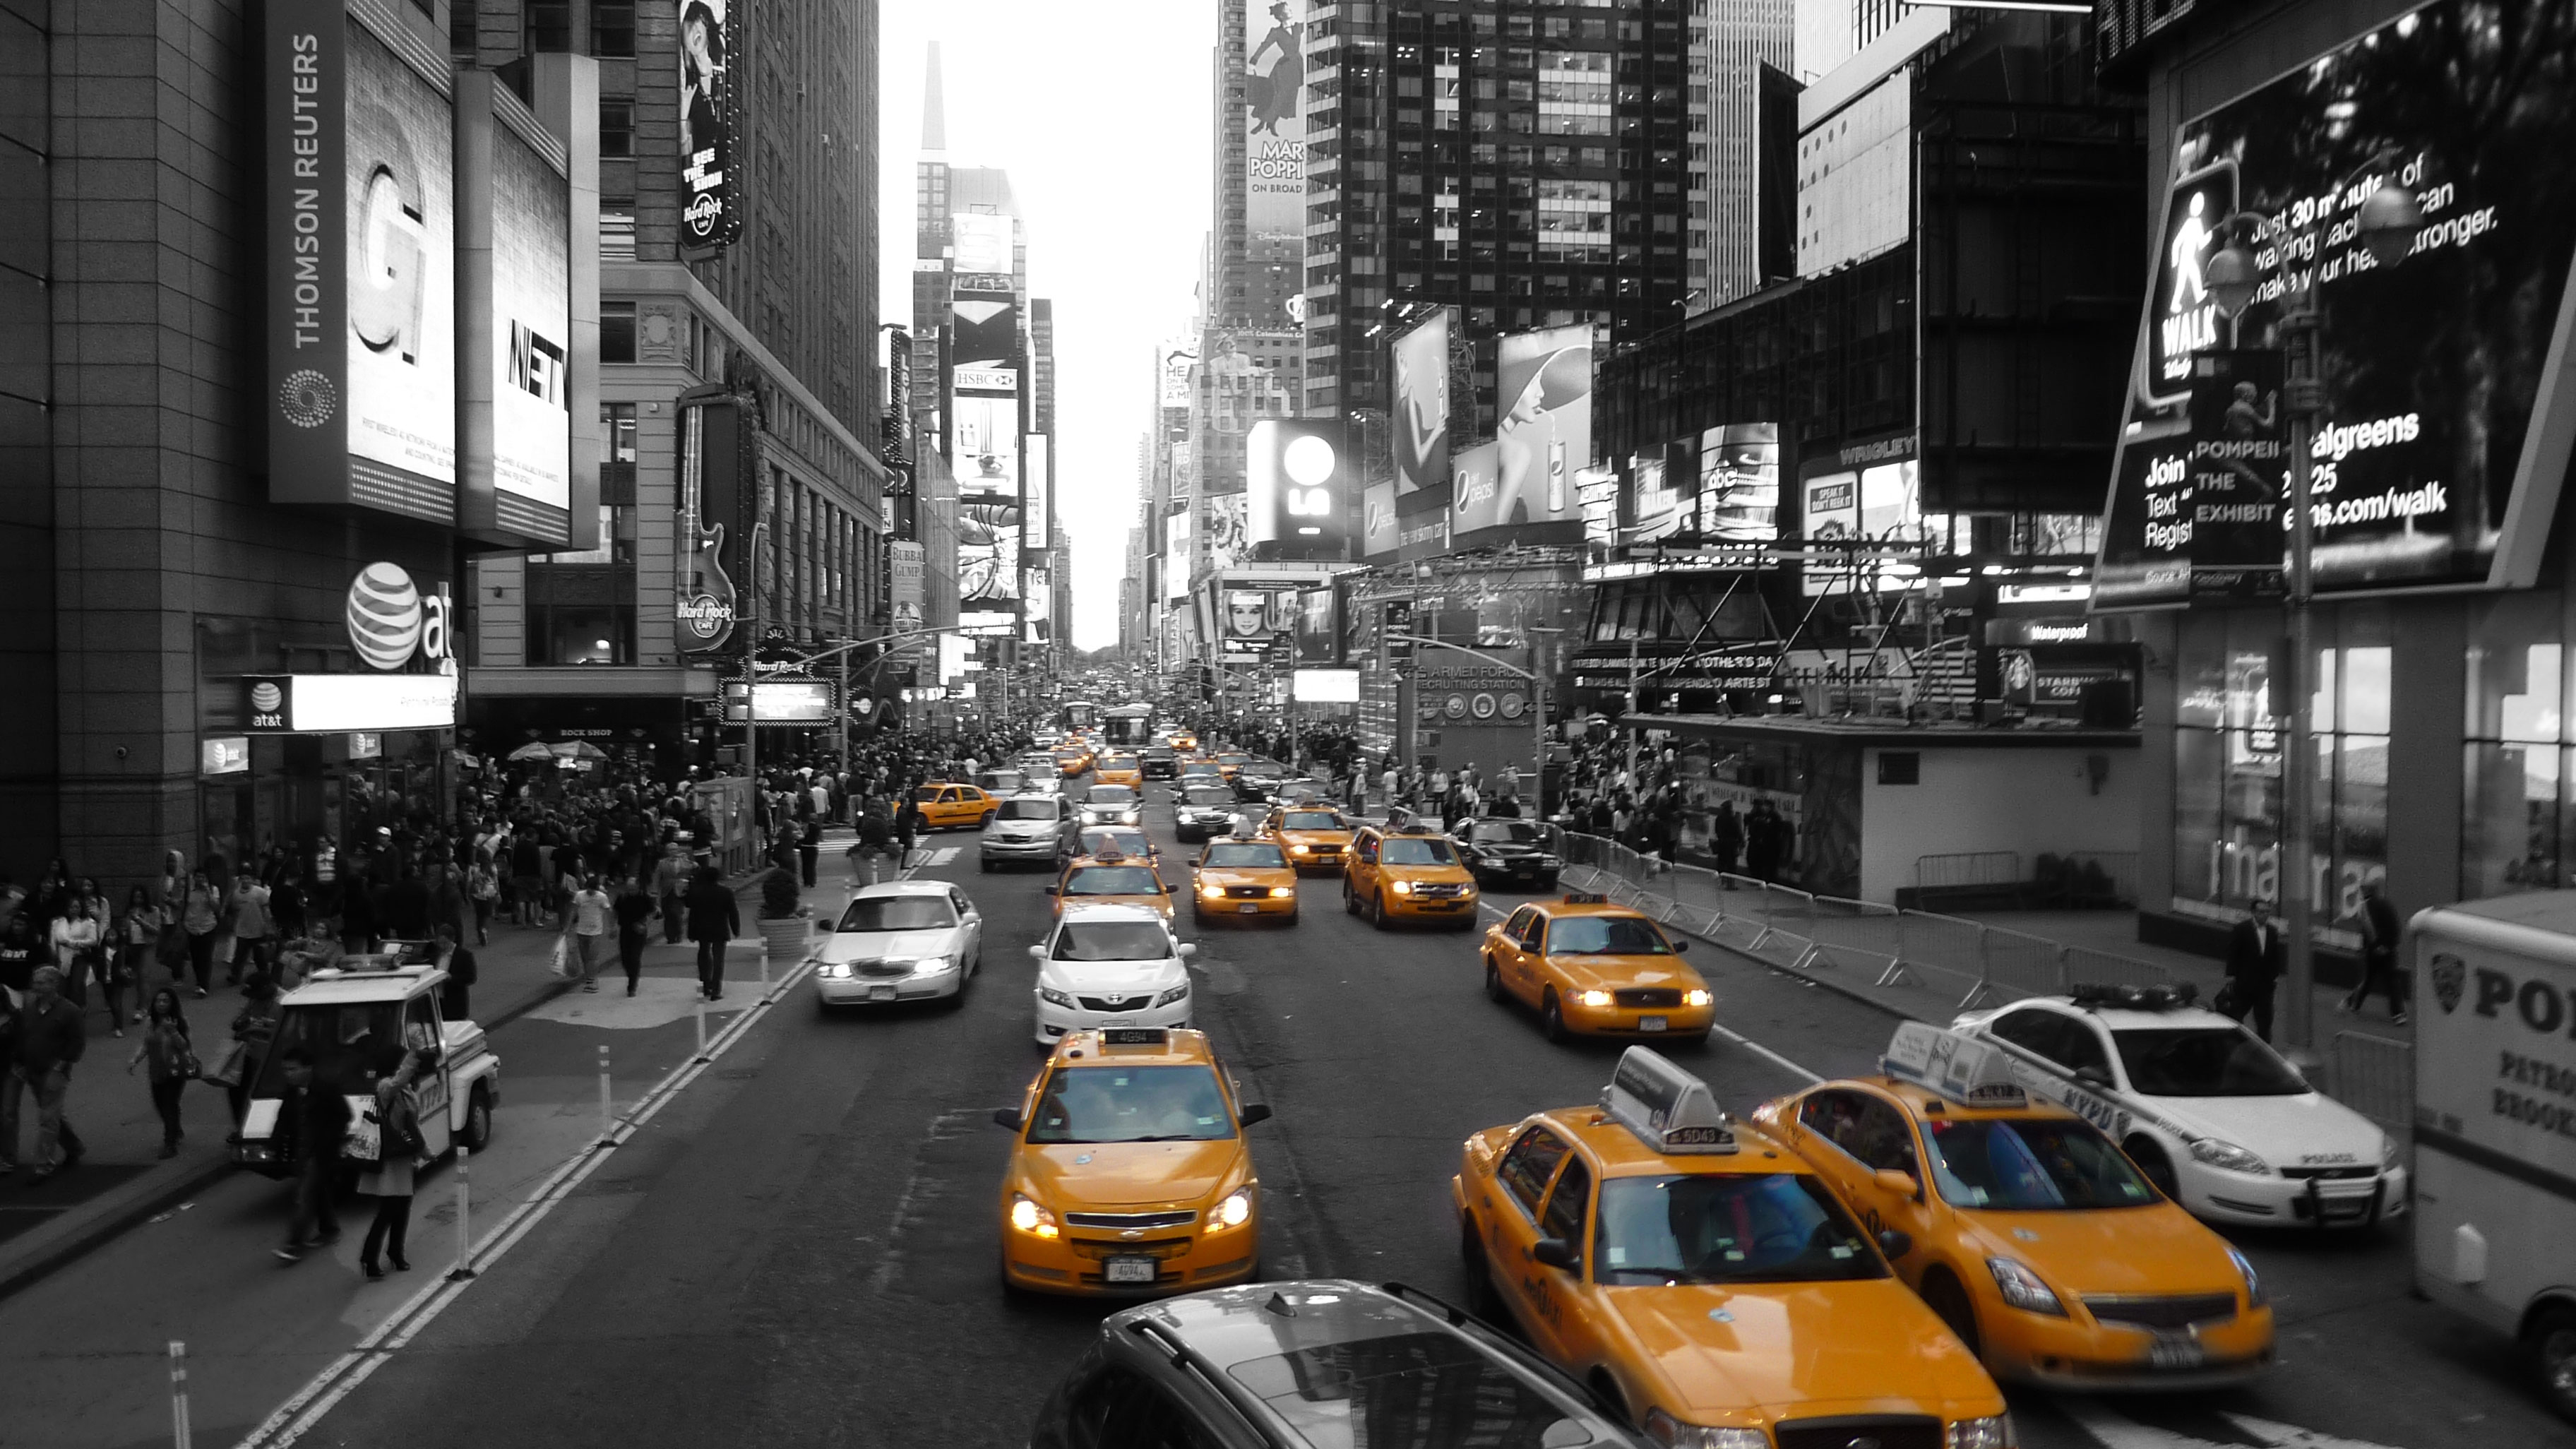 traffic, man made, new york, city, selective color, cities